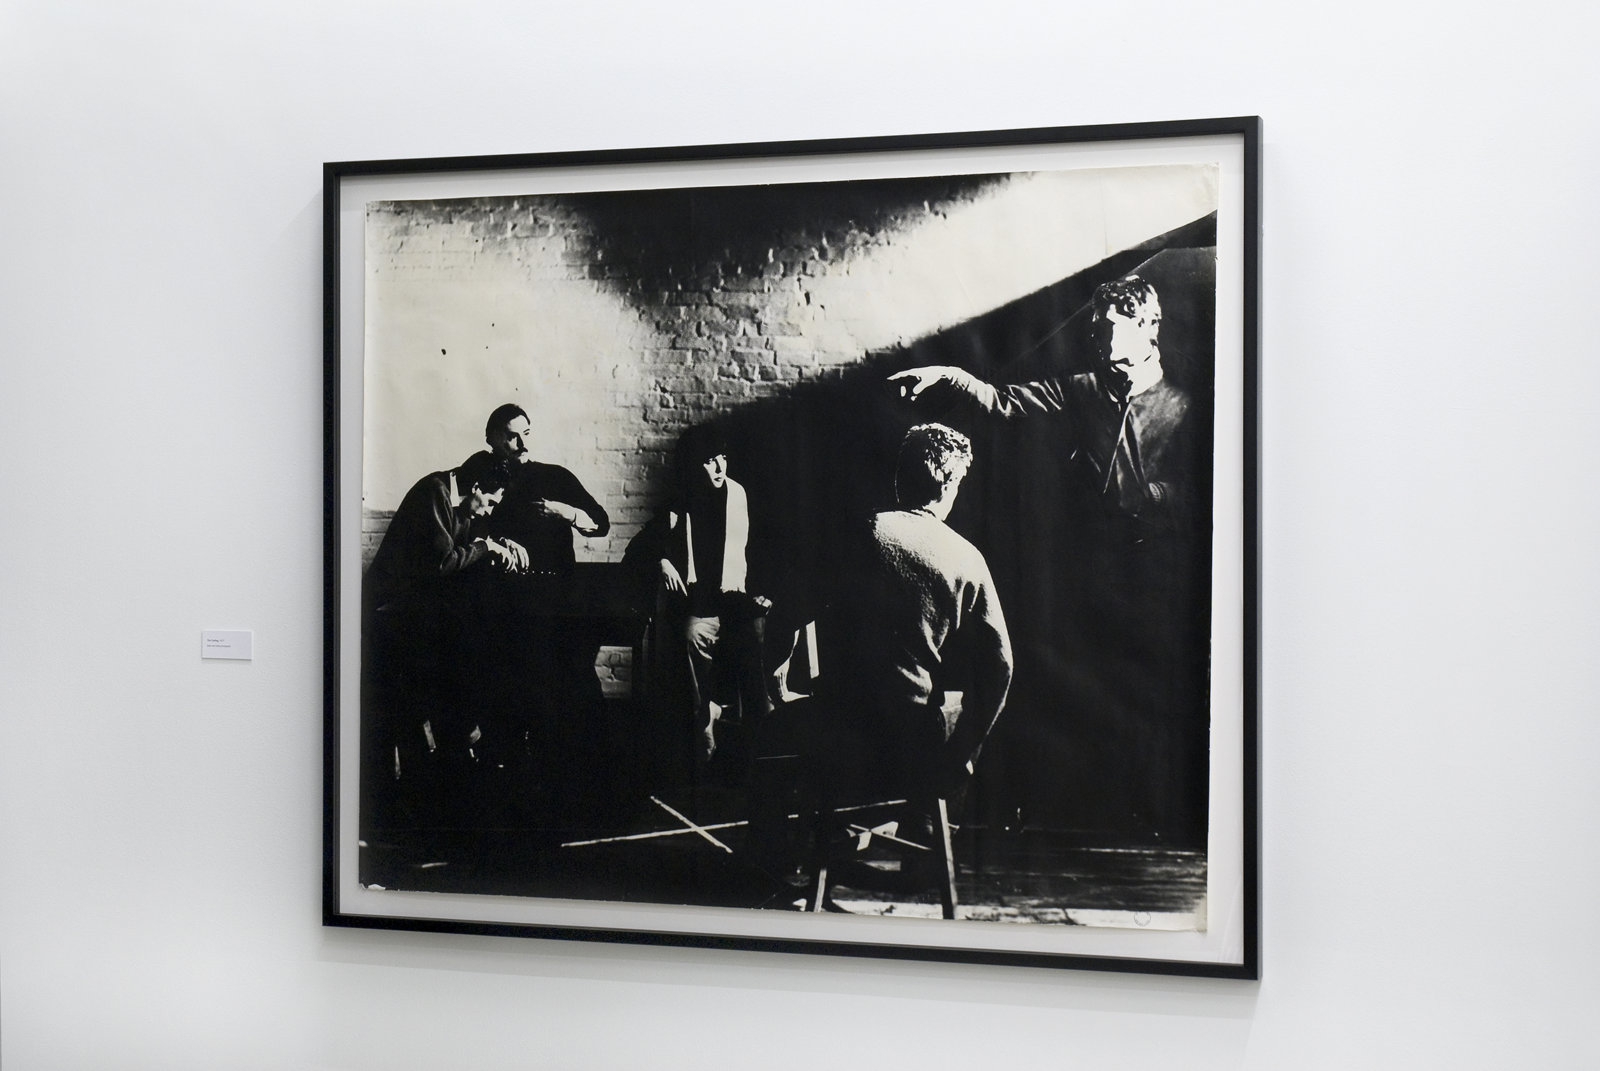 Ian Wallace, The Calling, 1977, black and white photograph, 47 x 58 in. (118 x 146 cm)